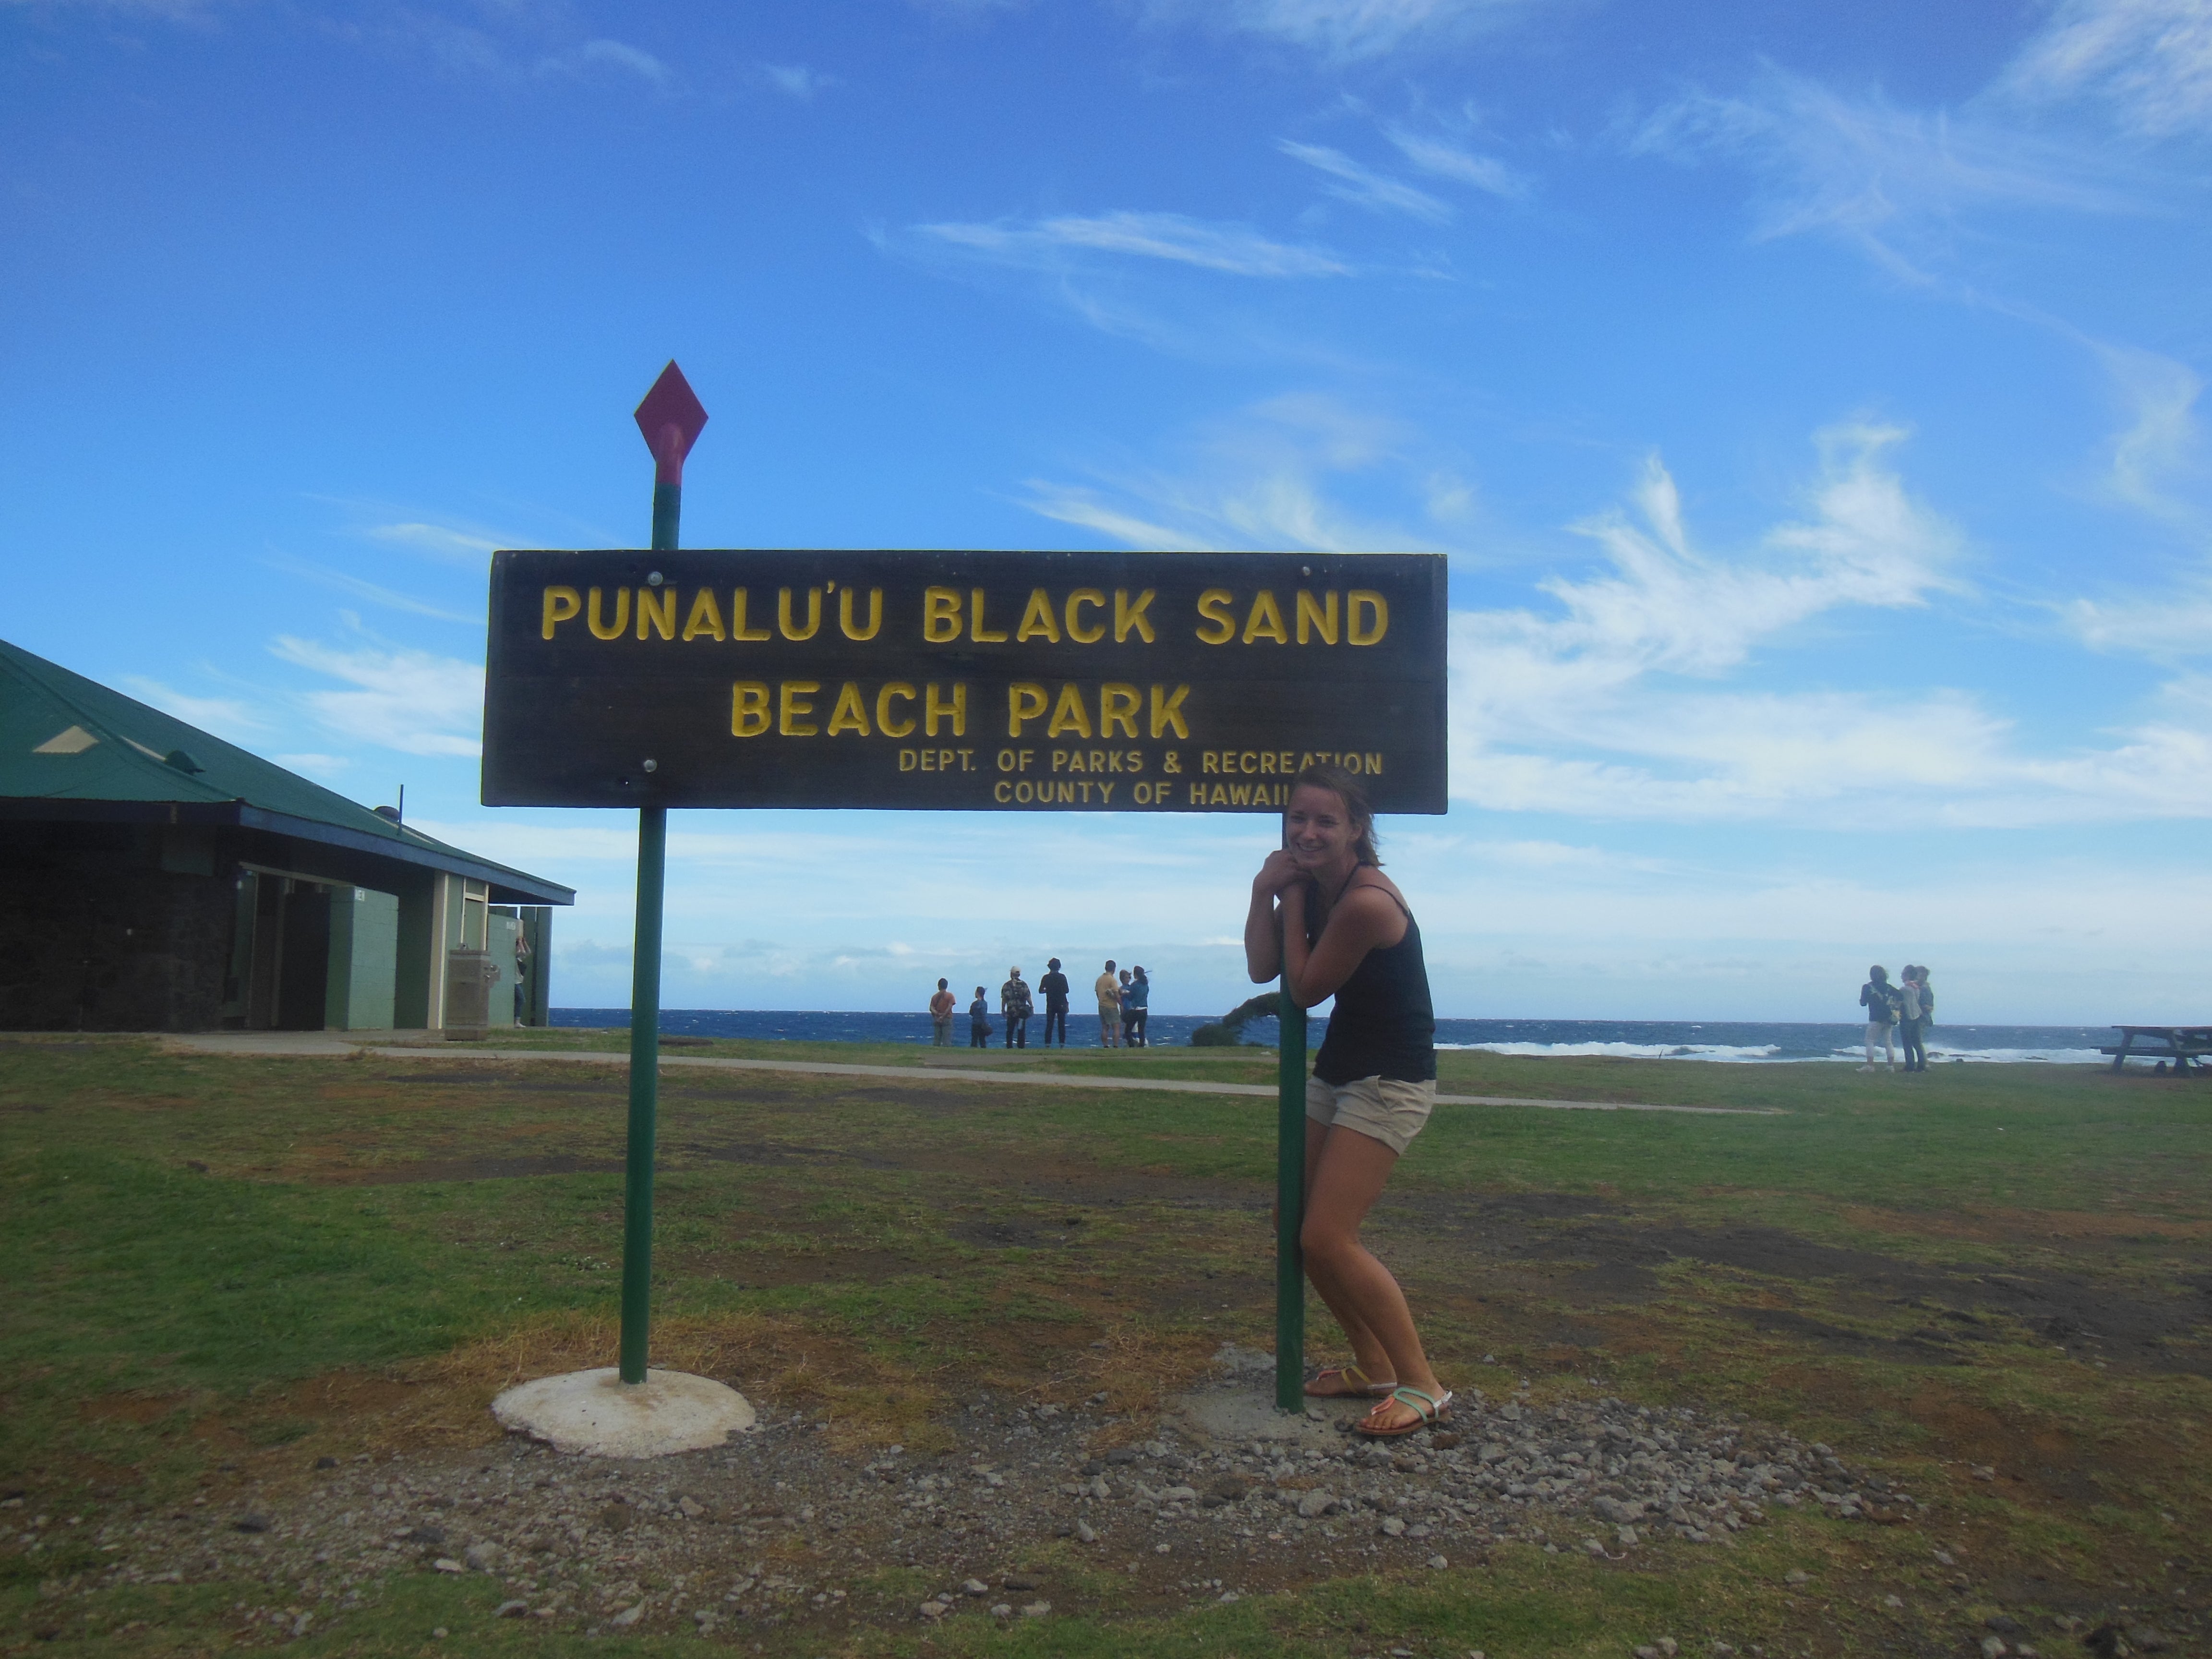 The image shows a woman holding on to the sign of Punaluu Black Sand Beach Park on the Big Island of Hawaii